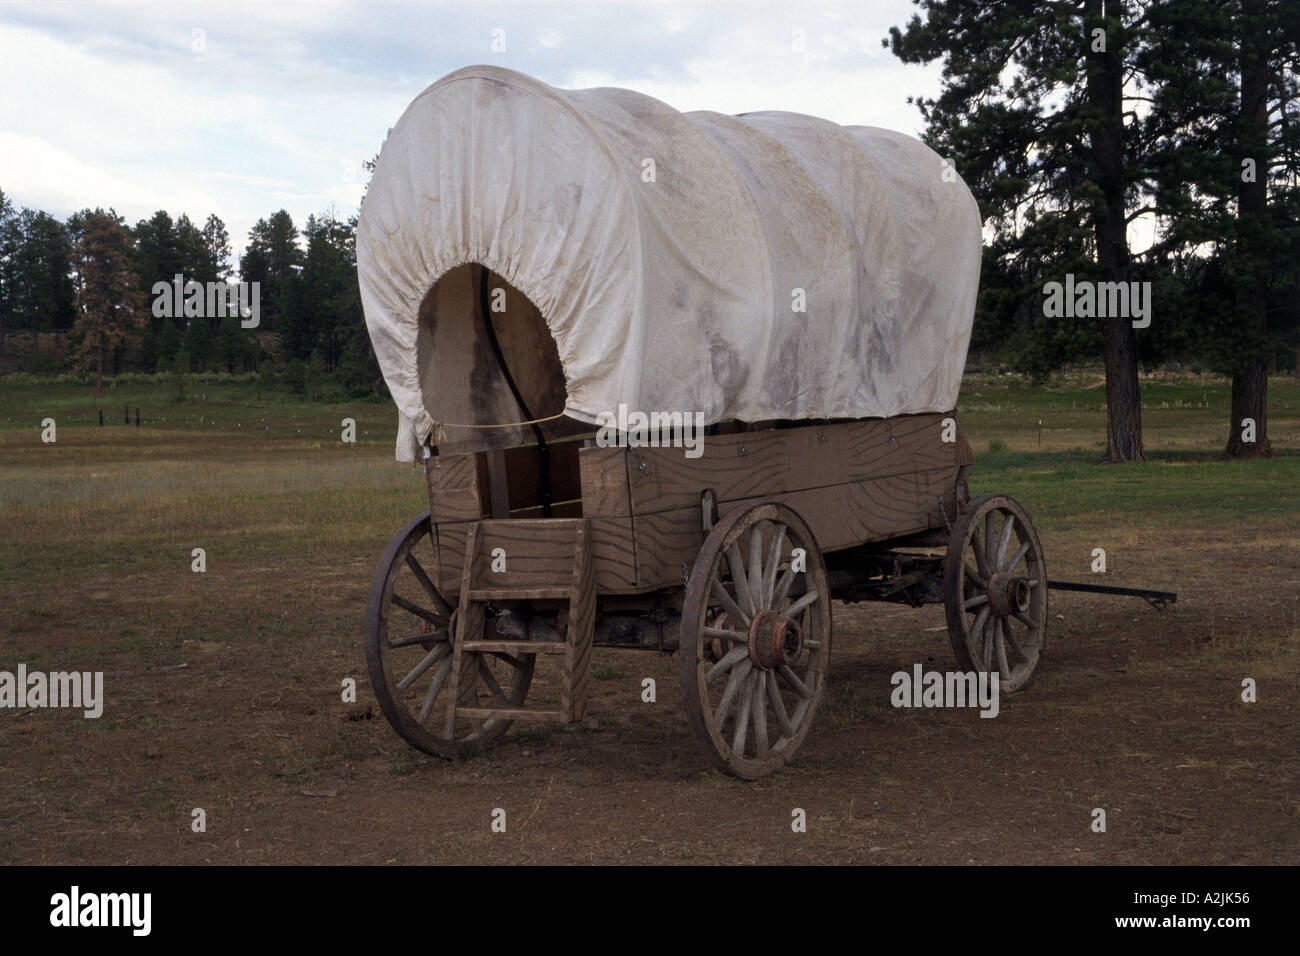 Covered wagon of the kind used in the Pioneer days of the American West Stock Photo